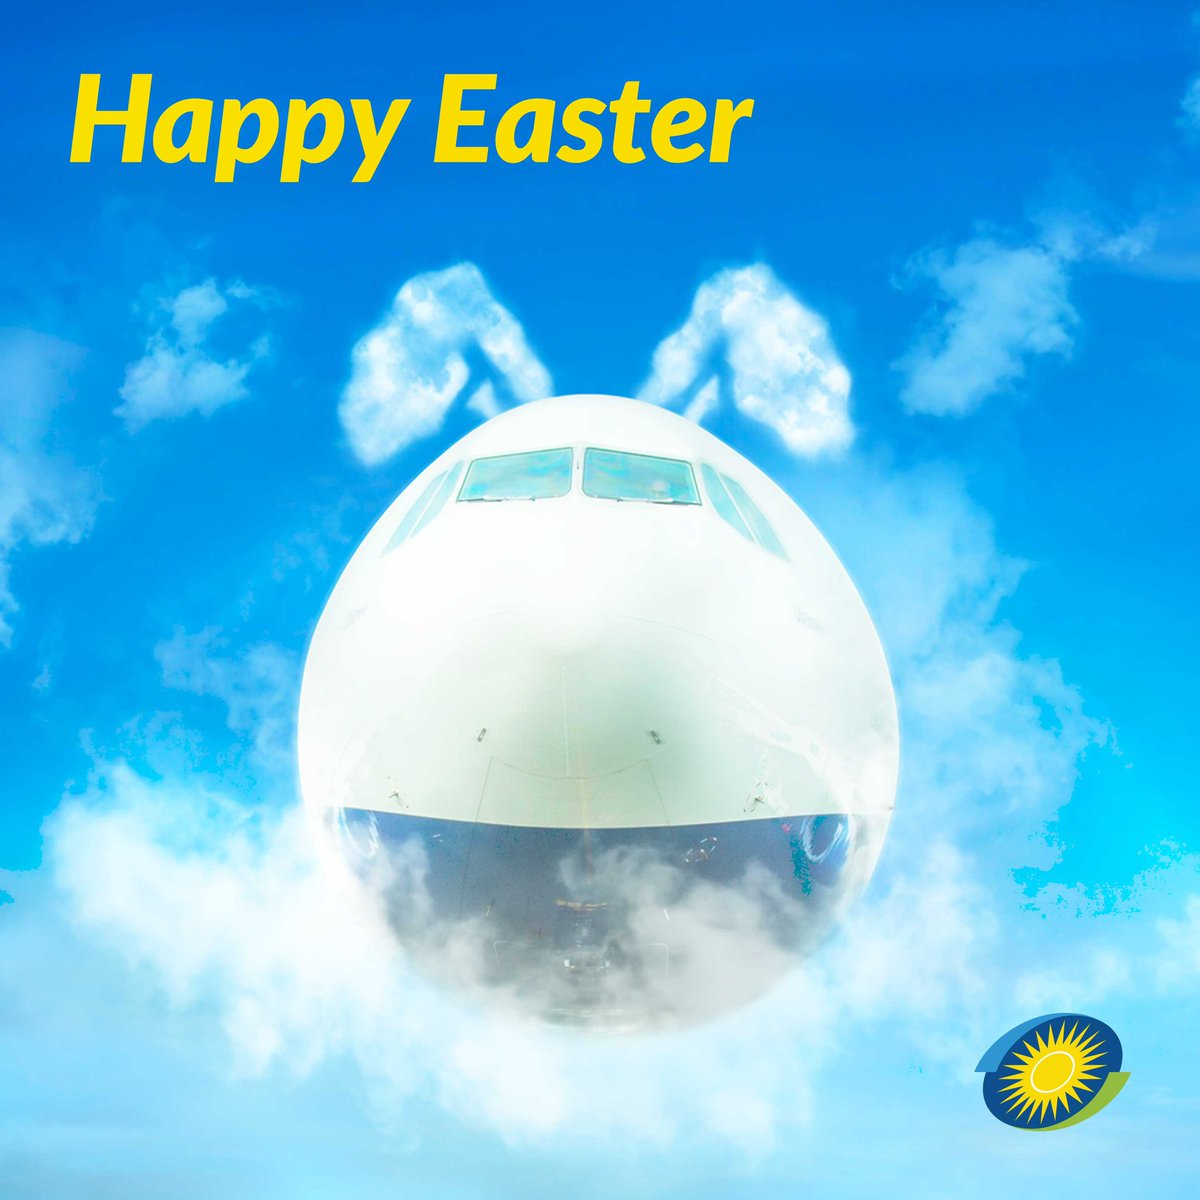 We wish you a happy Easter filled with peace, love, and happiness. May your celebrations be filled with warmth and cherished memories. #FlyTheDreamOfAfrica #Easter